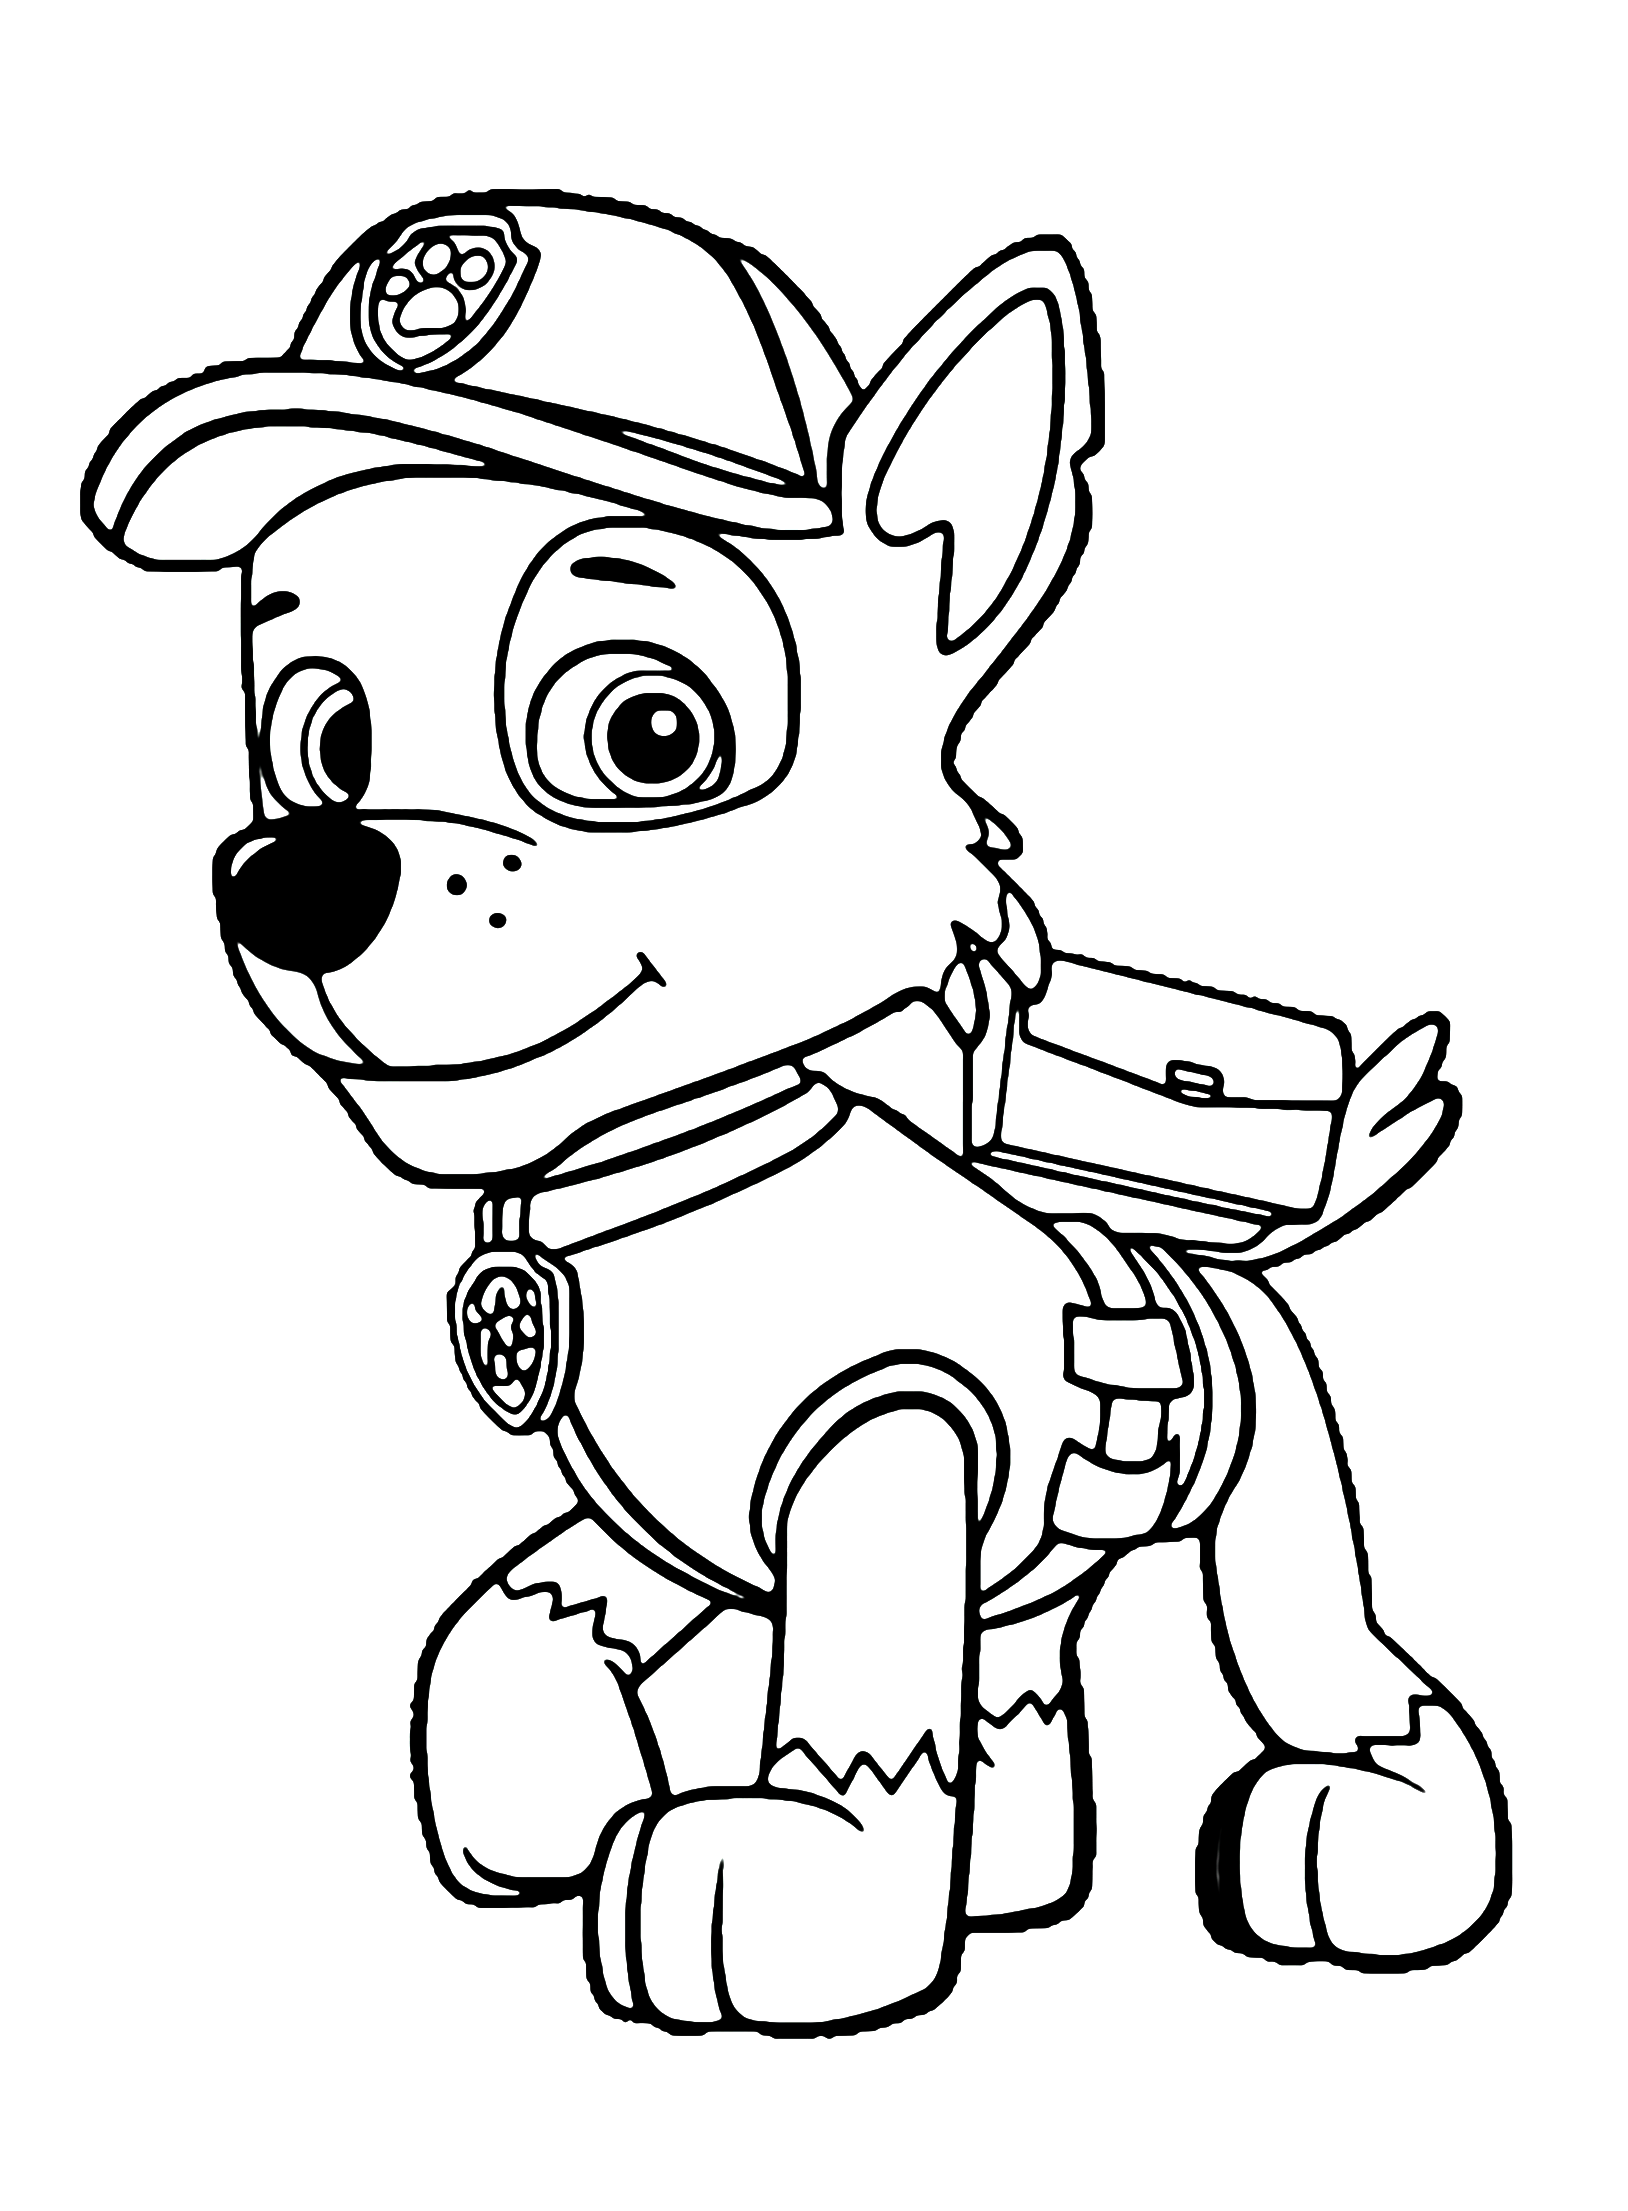 Paw Patrol Printable Coloring Pages for Kids (2020) » Print Color Craft